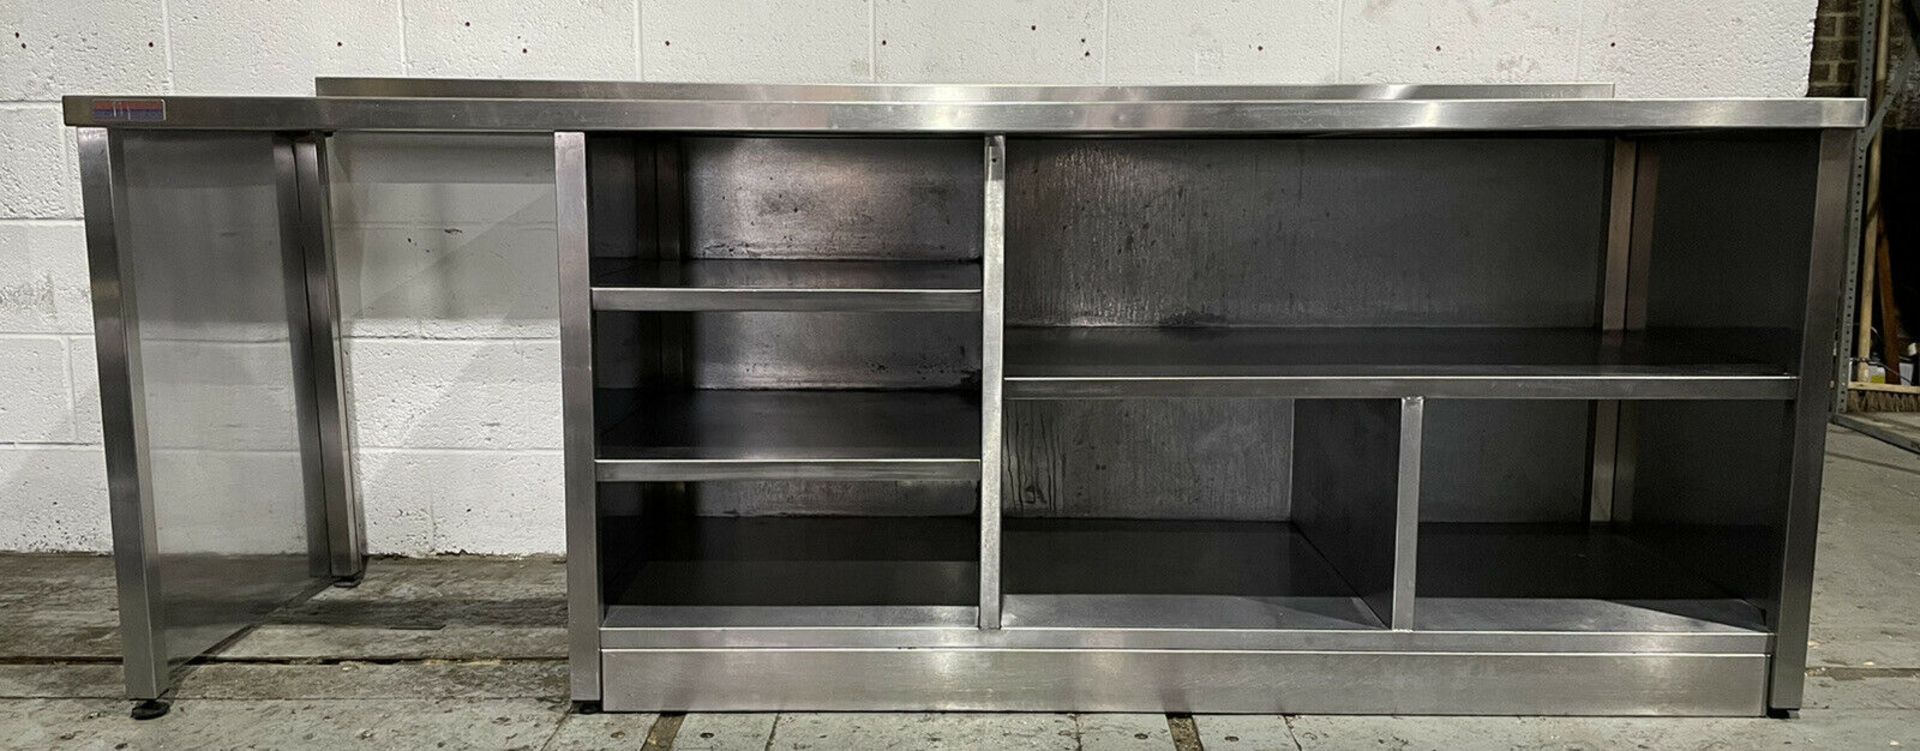 Stainless Steel Preperation Unit with Shelves - Image 2 of 6